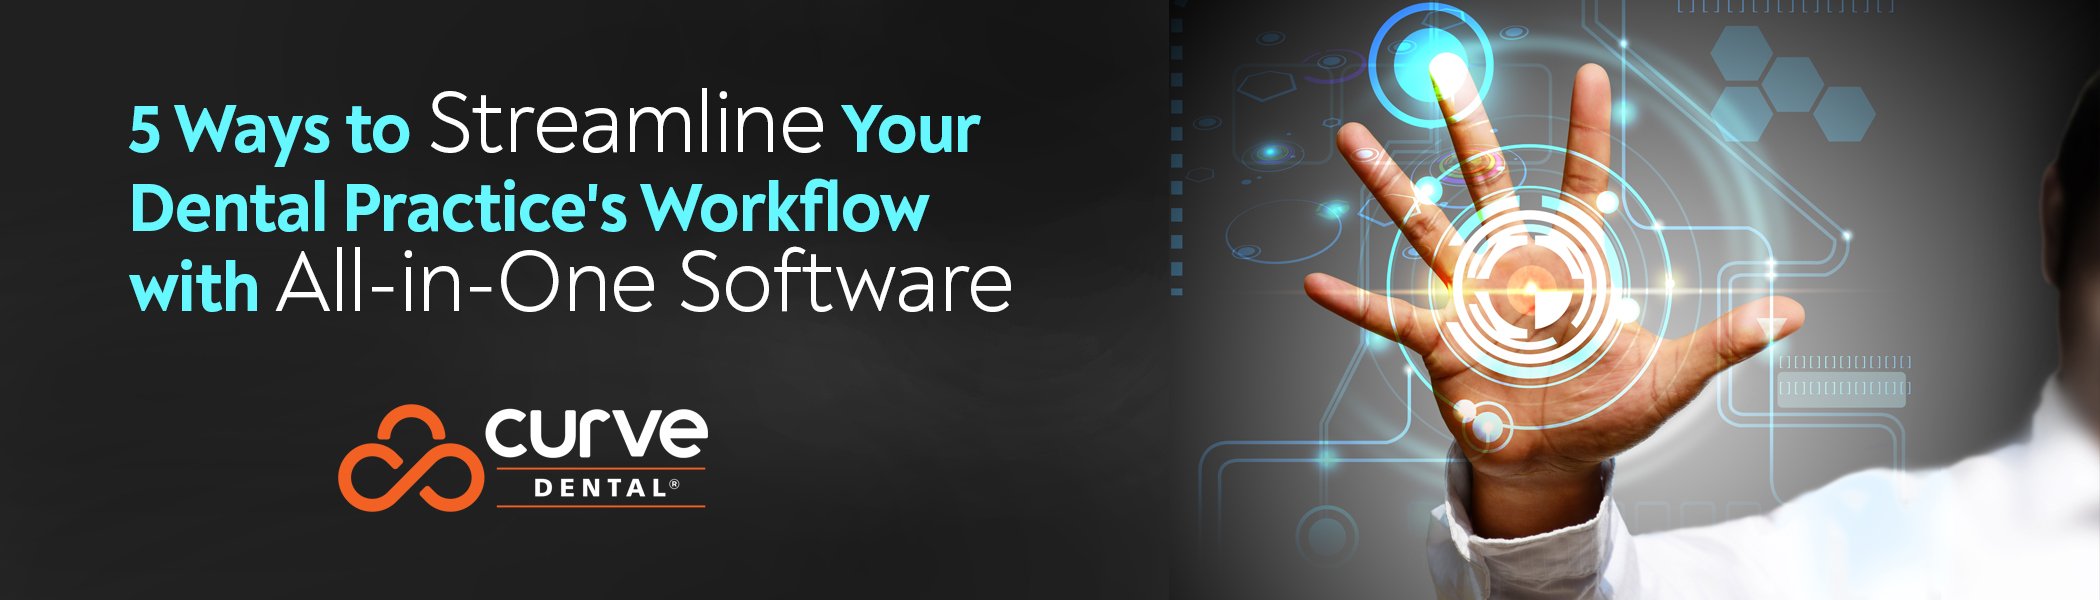 5 Ways to Streamline Your Dental Practice's Workflow with All-in-One Software